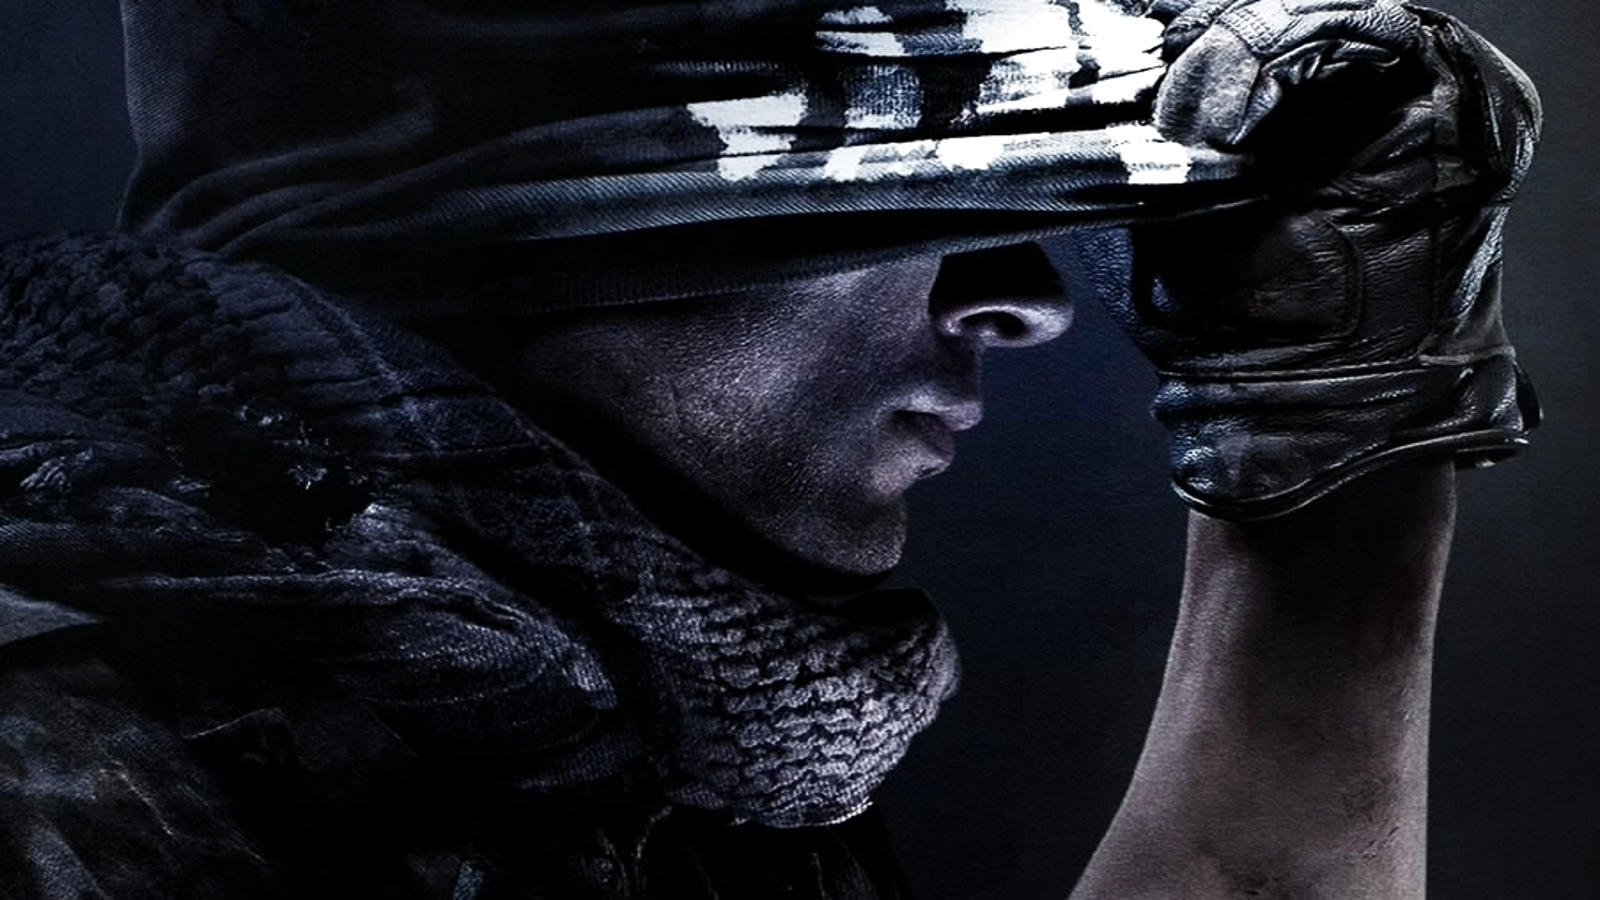 CoD: Ghosts is PS4, Xbox One's best-selling, most-played game - CNET